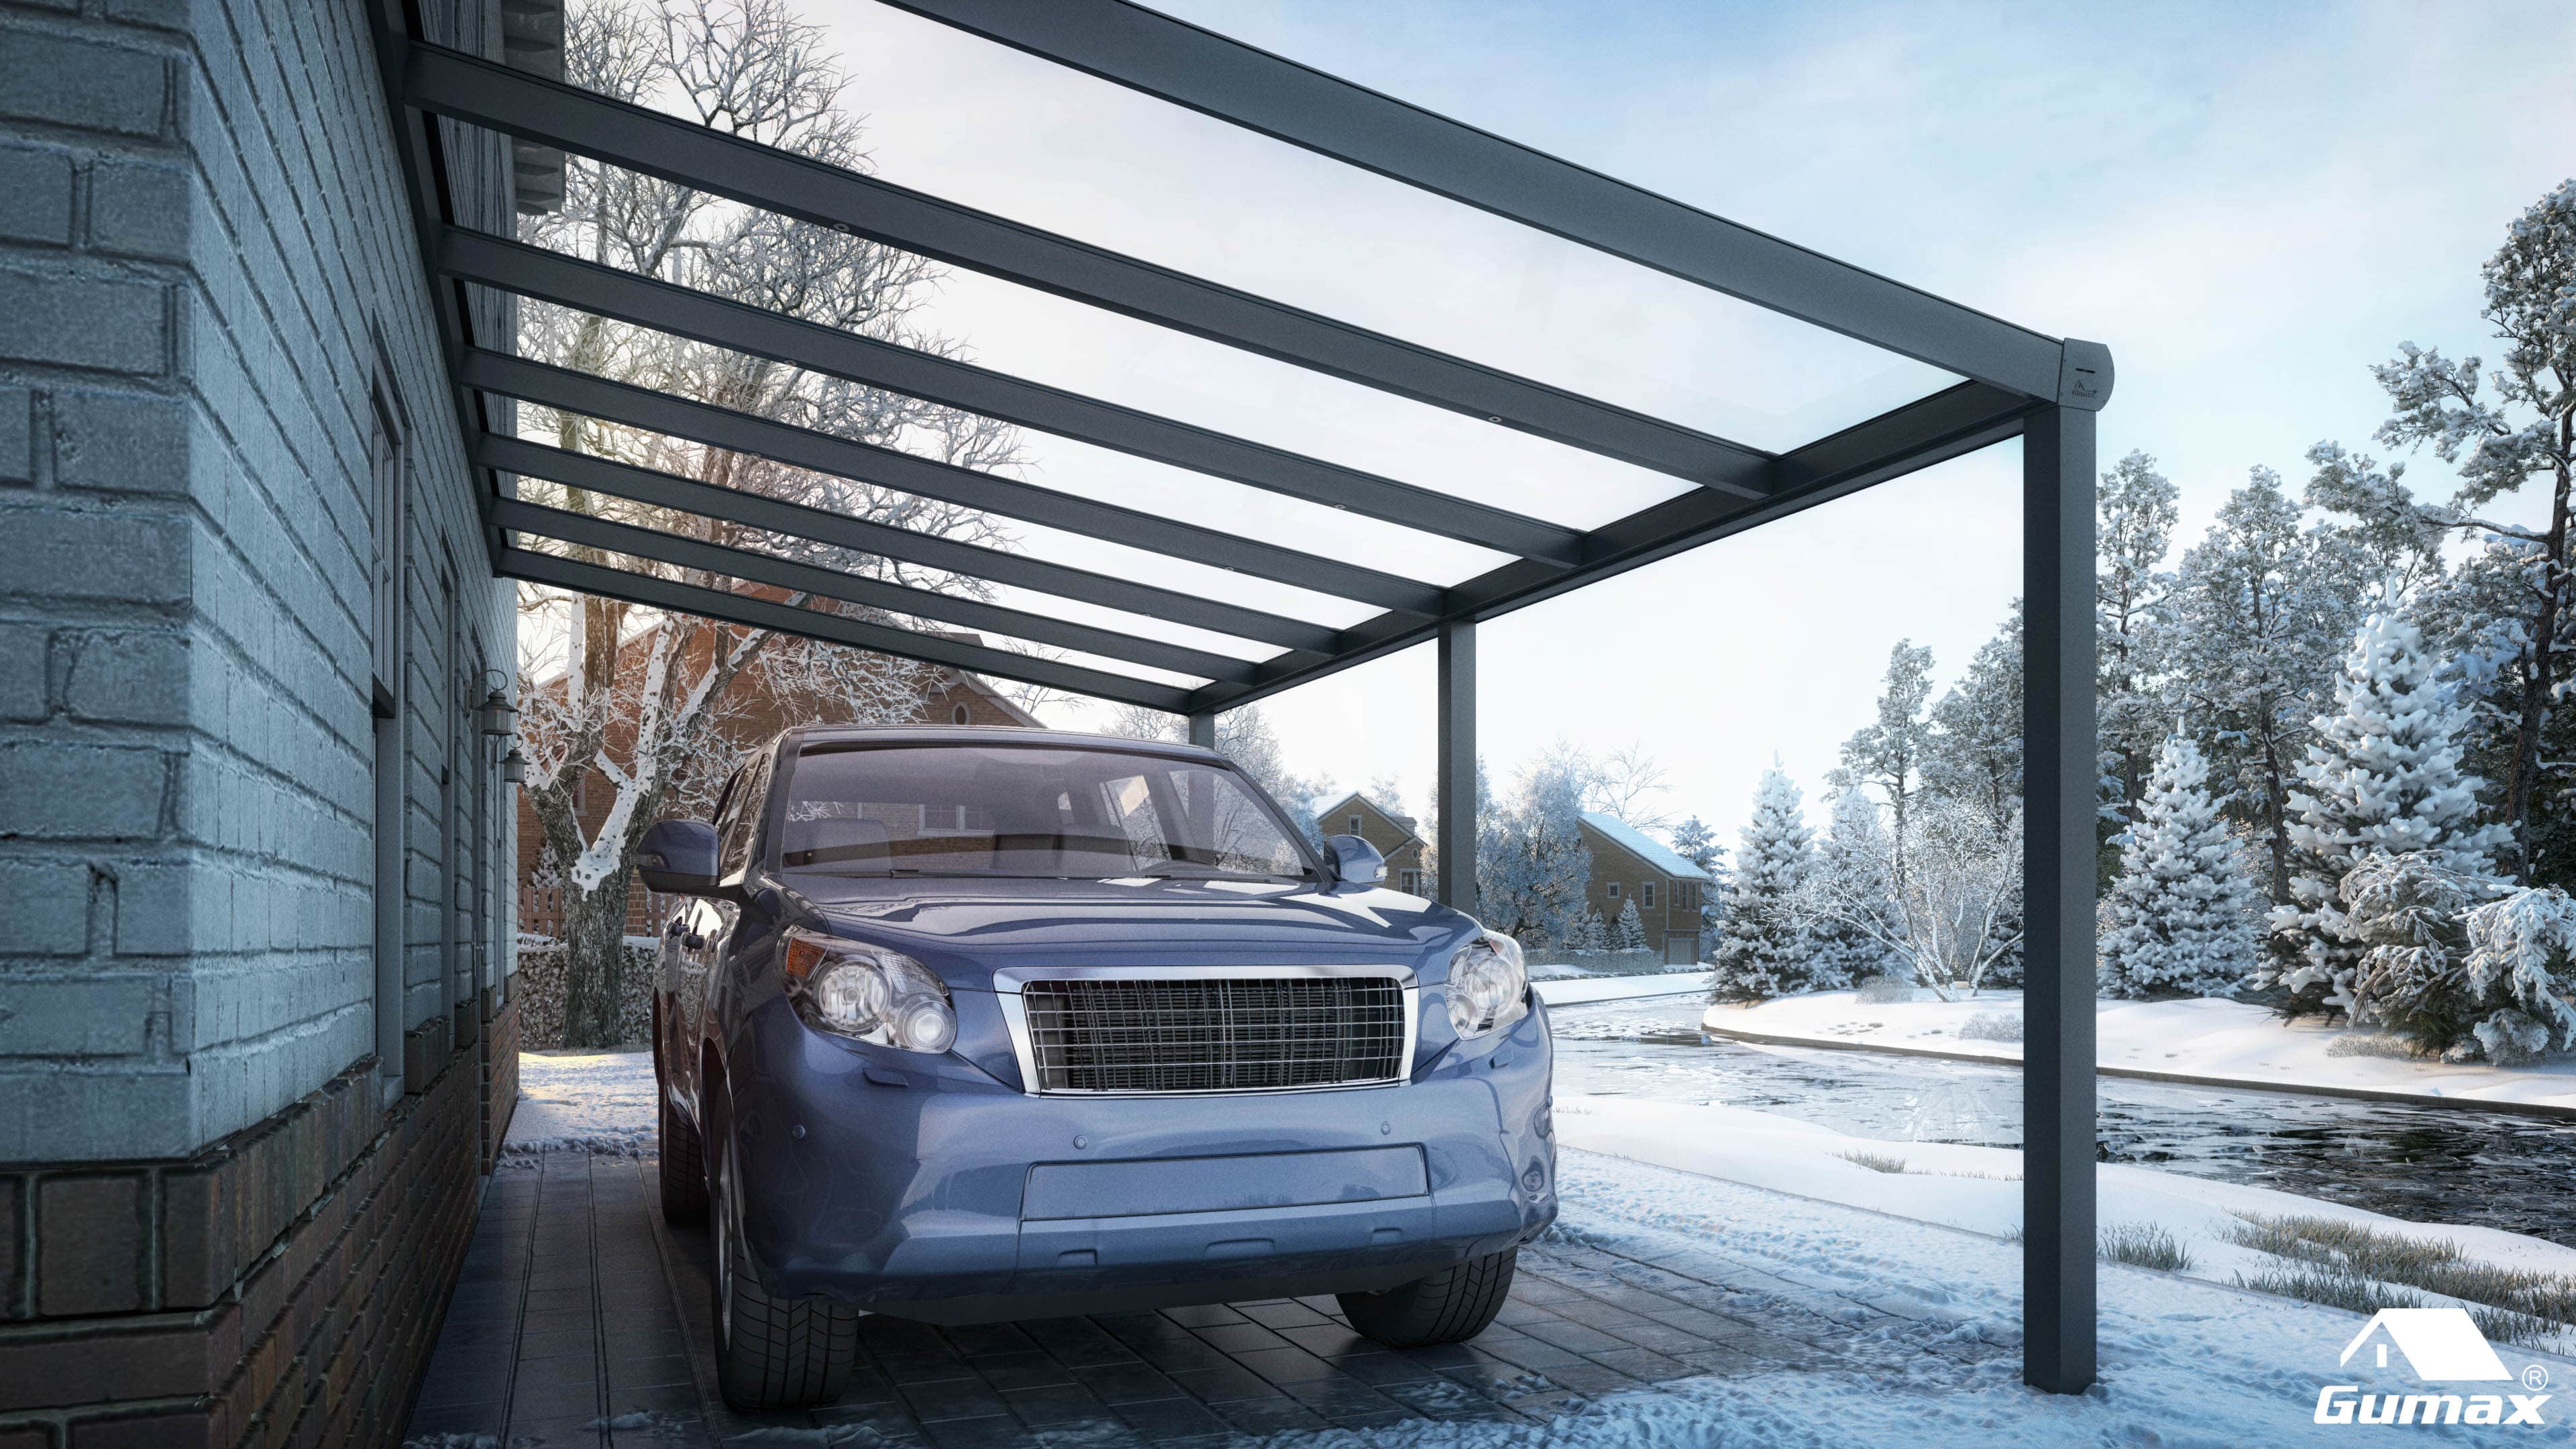 Carport in cold weather